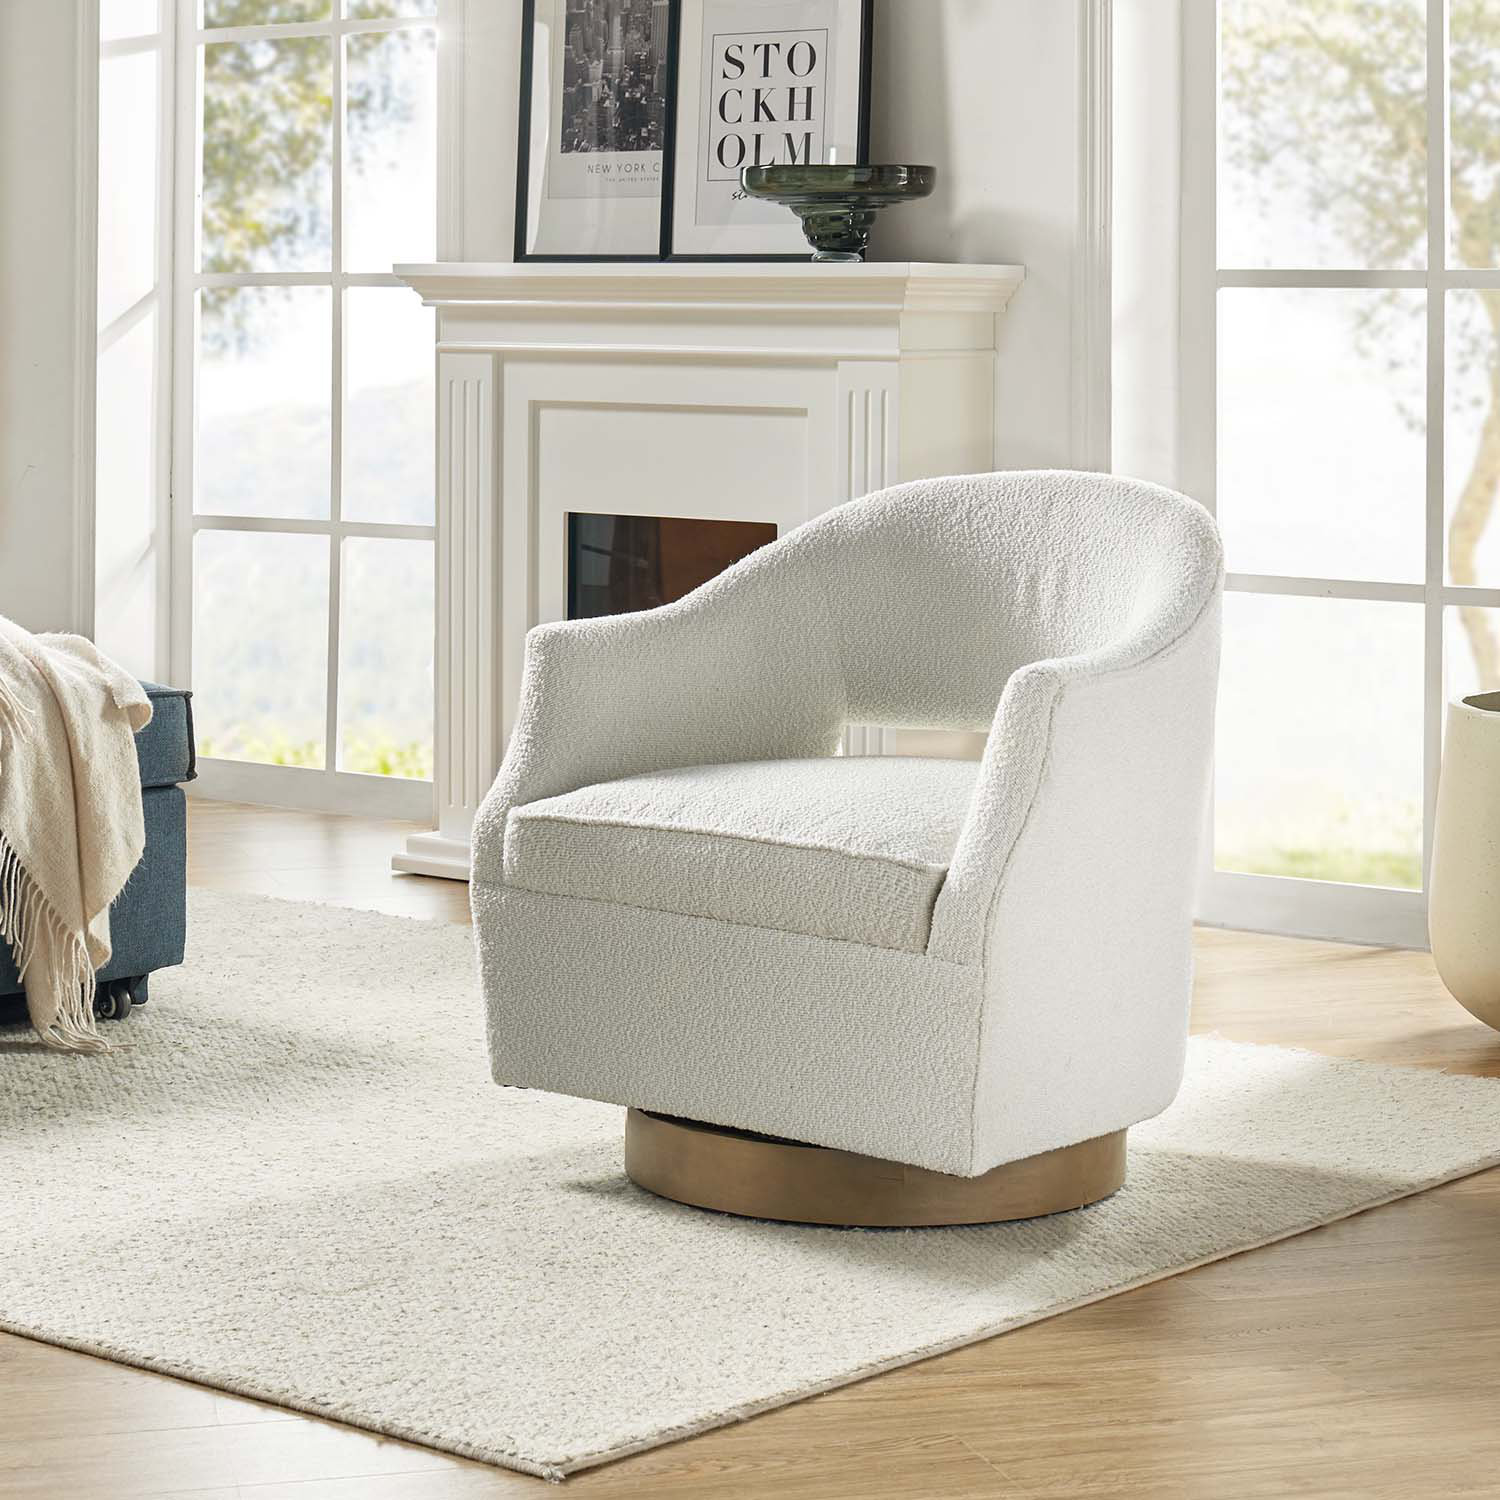 Aquille Upholstered Swivel Barrel Chair with Solid Wood Base Lark Manor Fabric: White Polyester